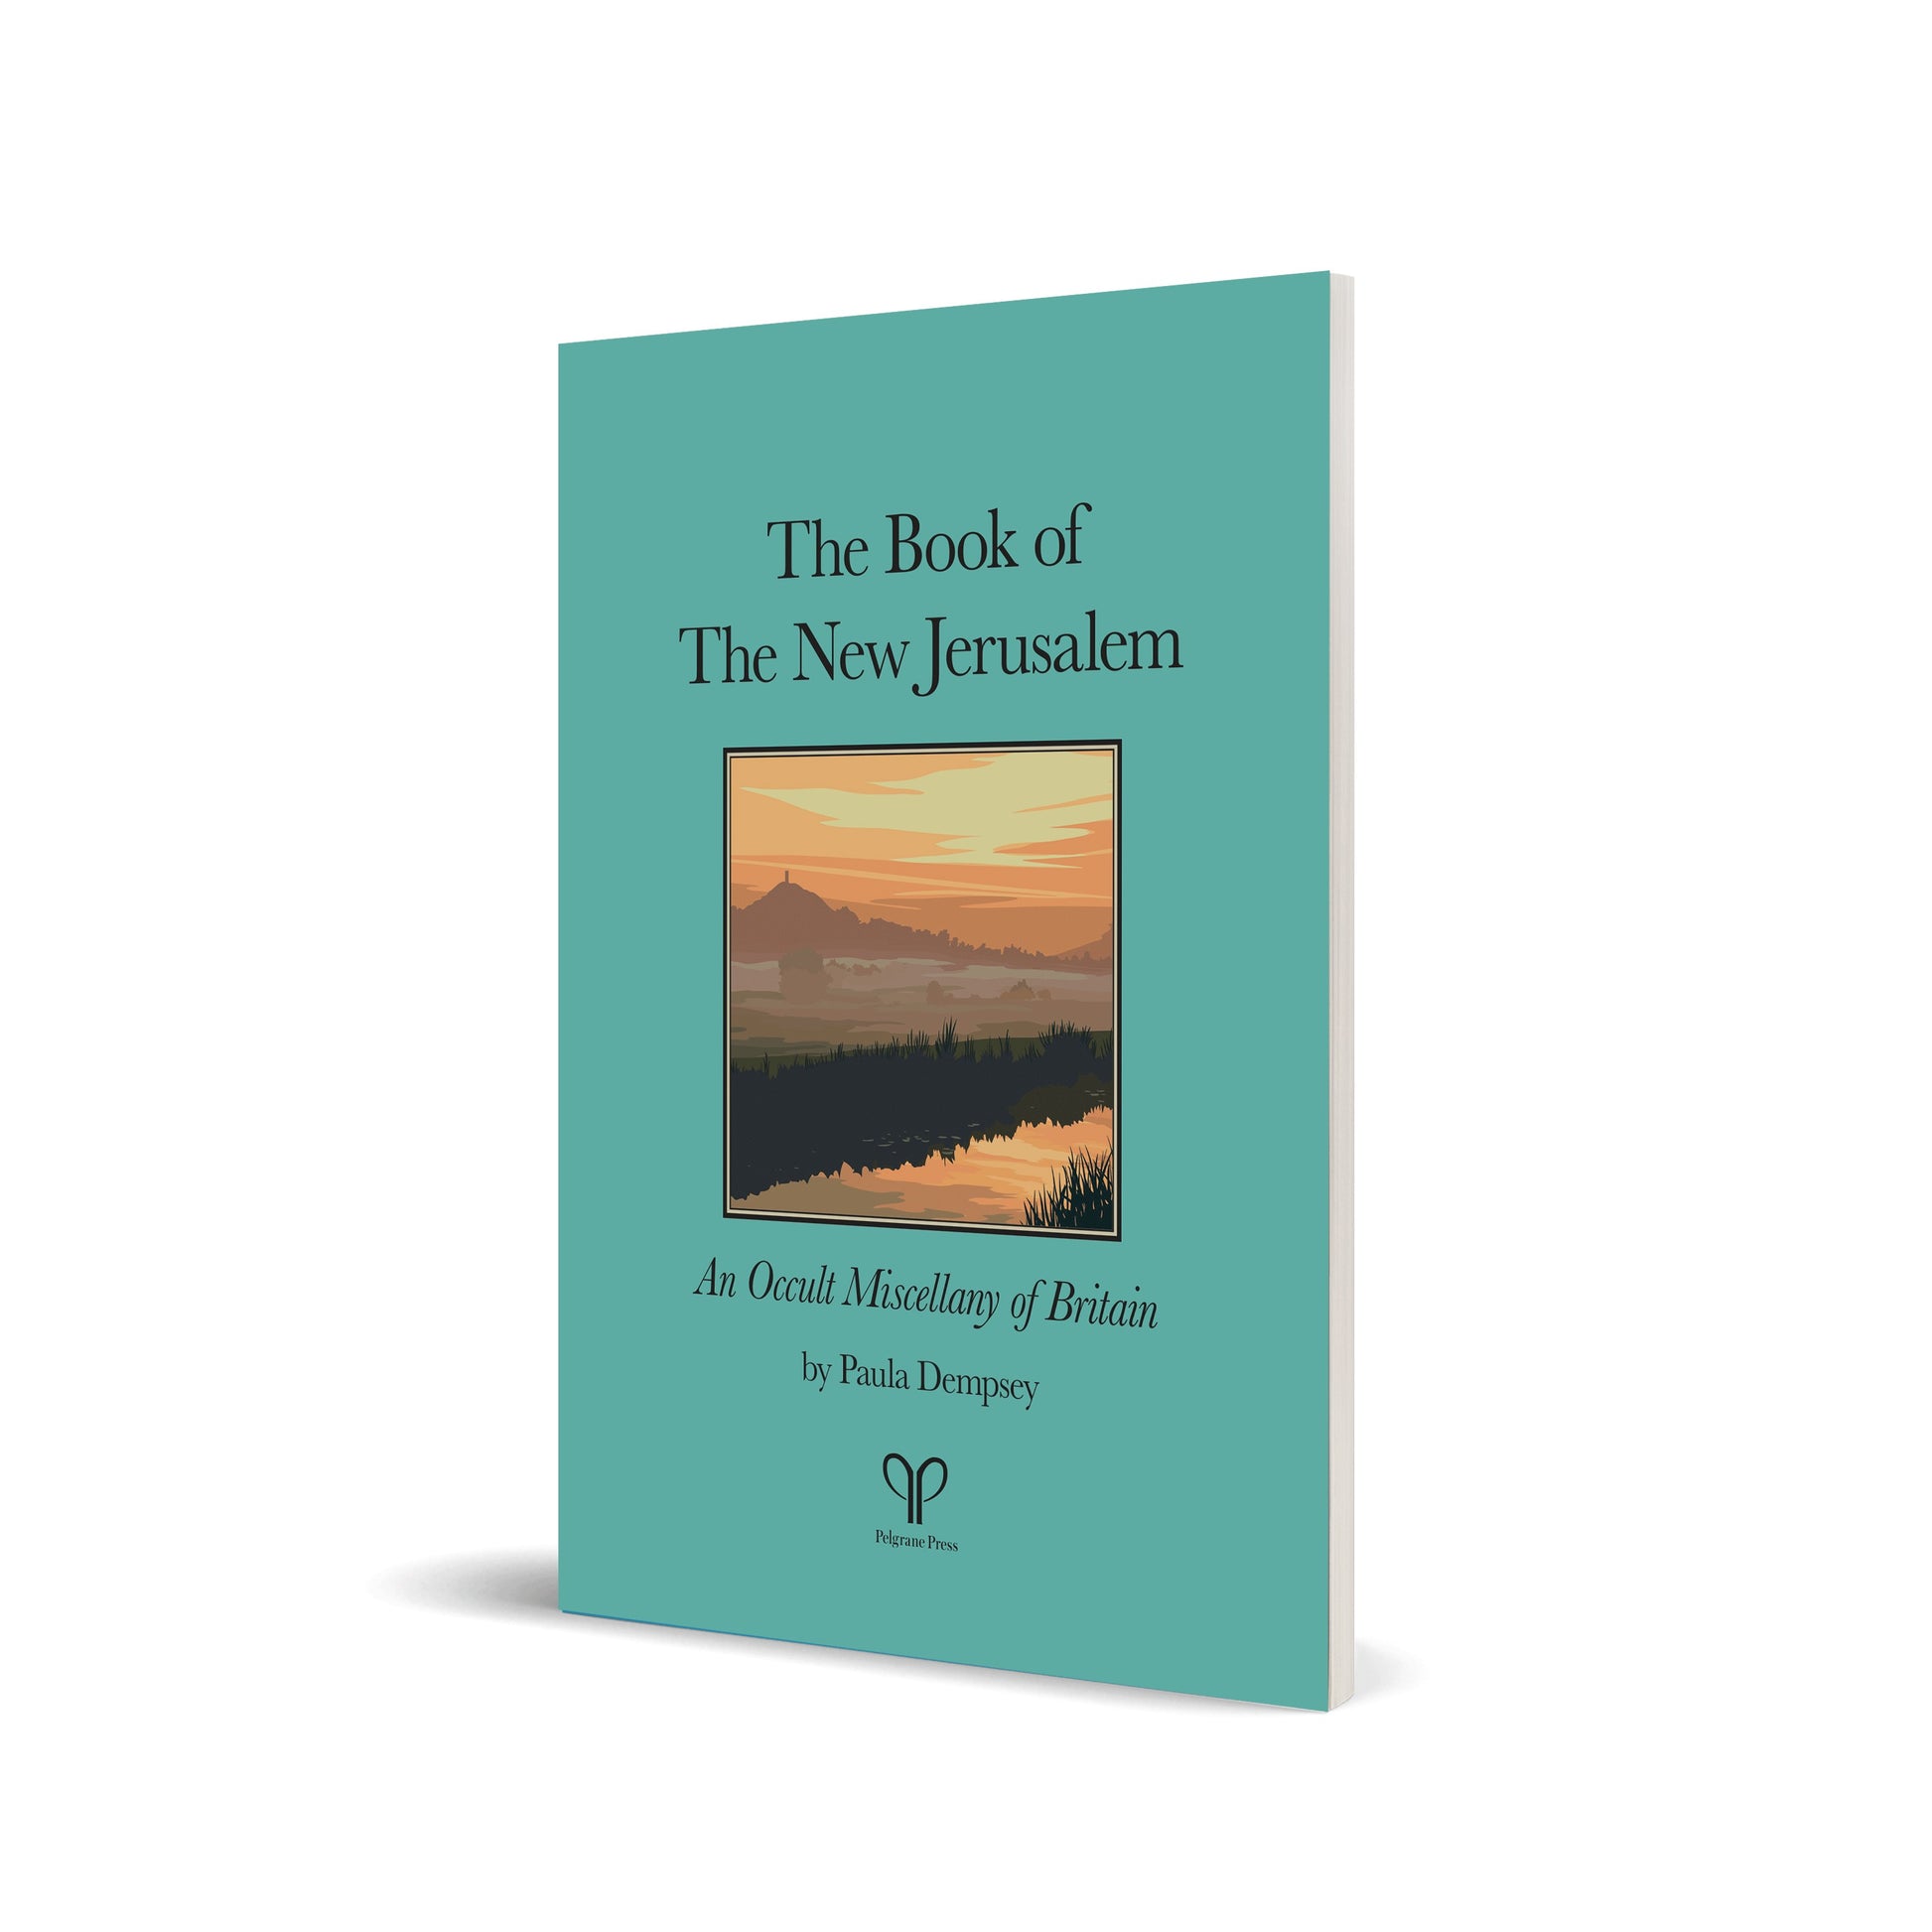 The Book of the New Jerusalem